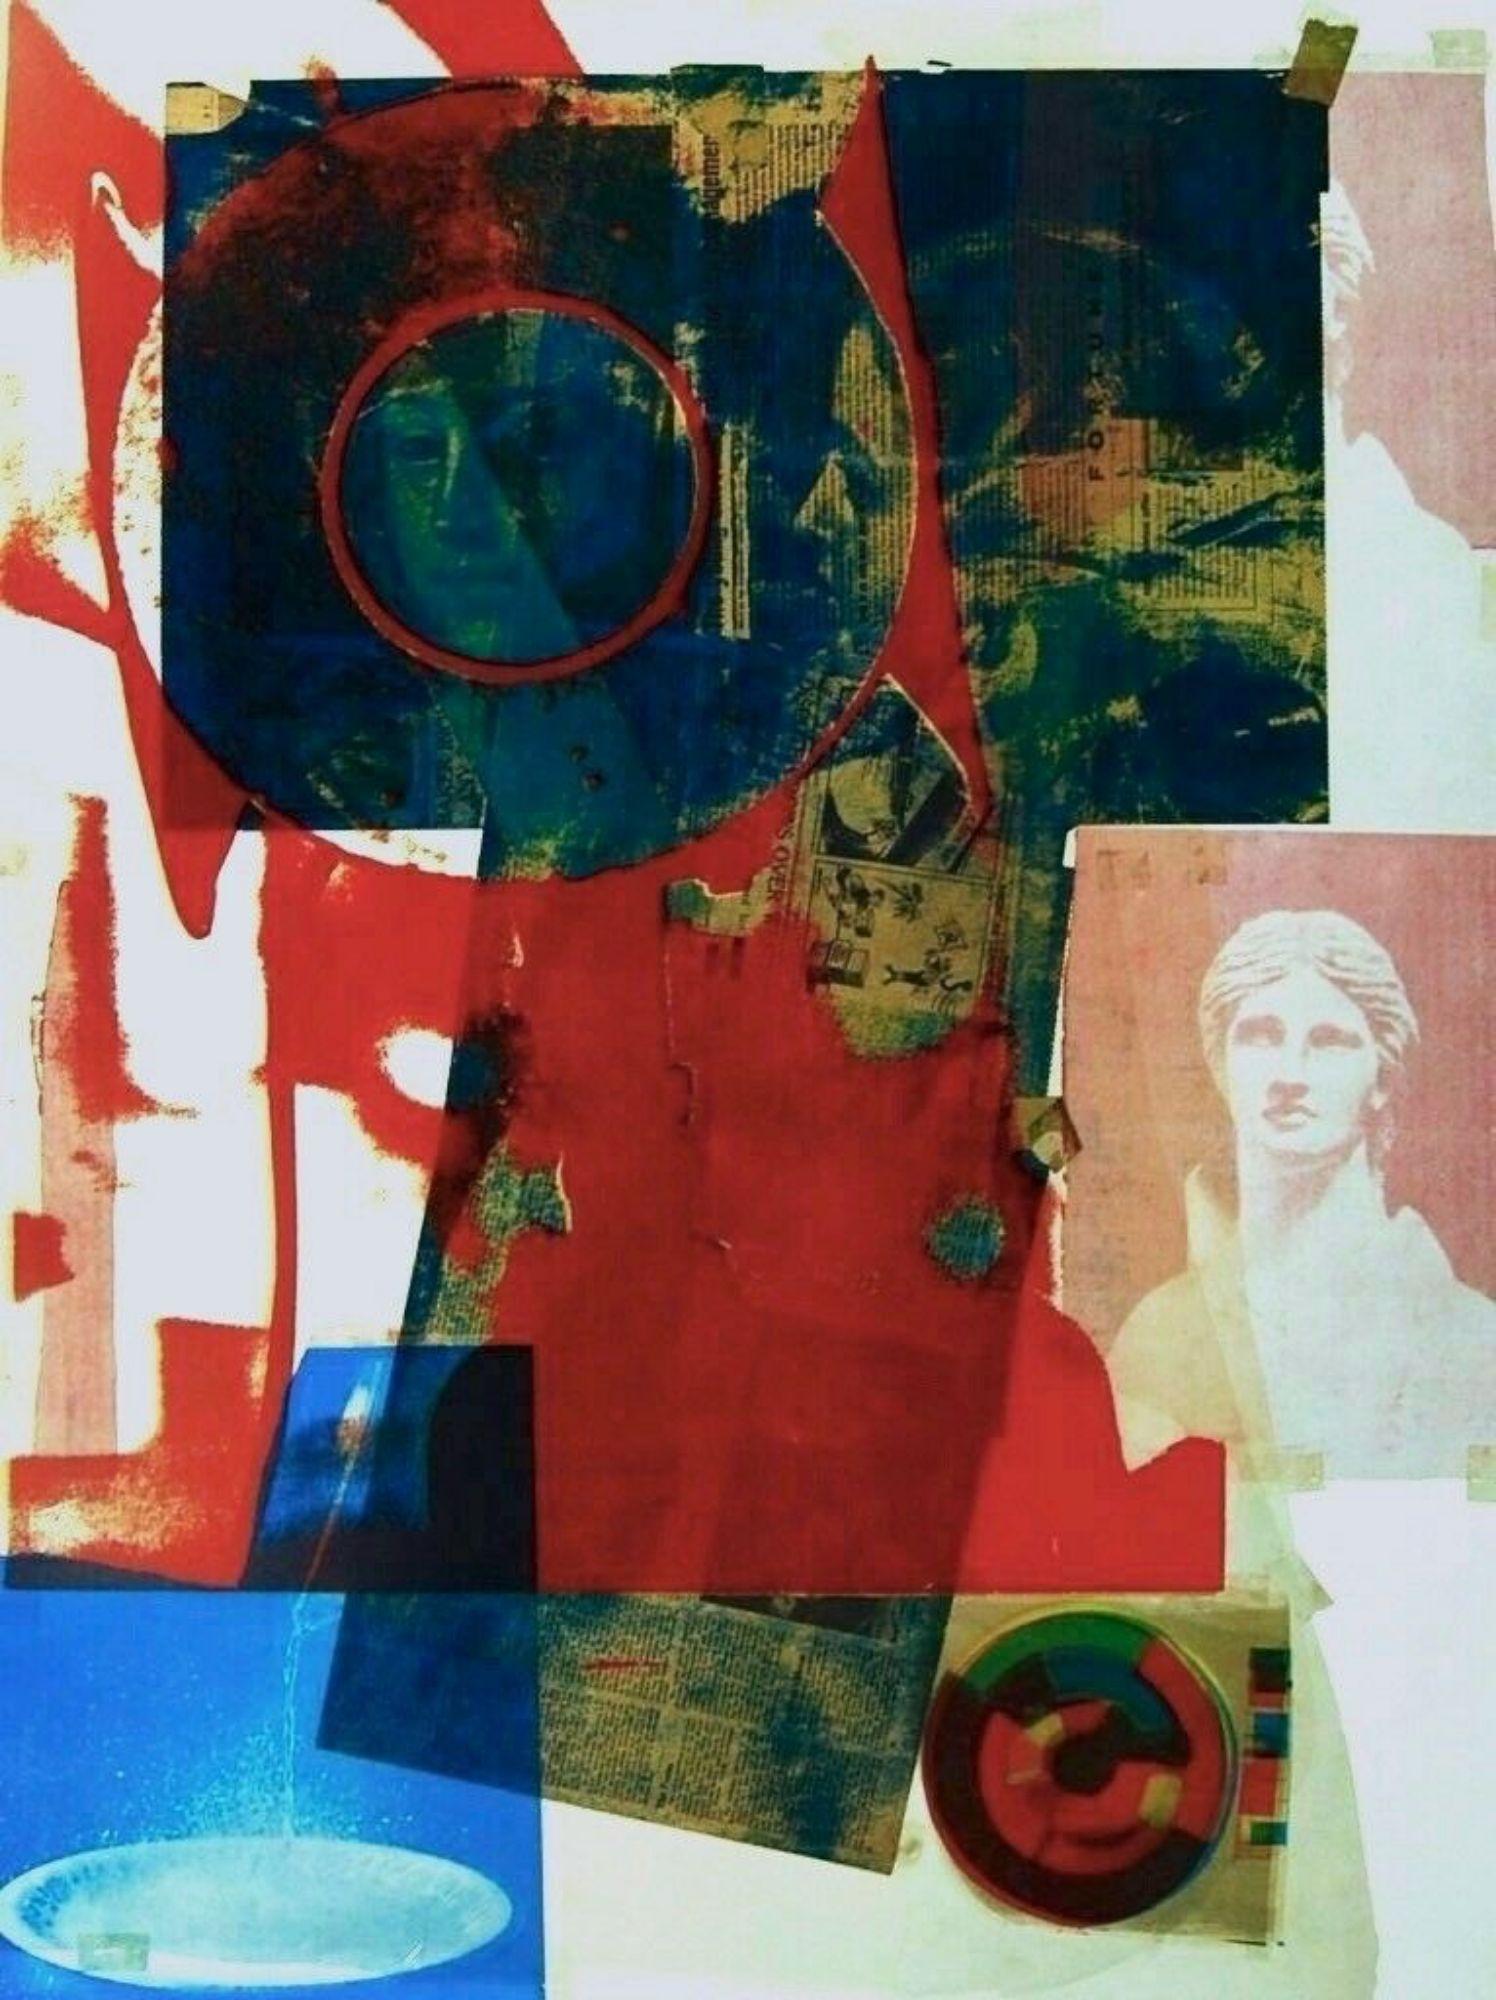 ROBERT RAUSCHENBERG (1925-2008) One of the most influential American artists, having led the direction of contemporary art since his first showings in New York City in the early 1950s, Rauschenberg  gainied notoriety with his combine sculptures and